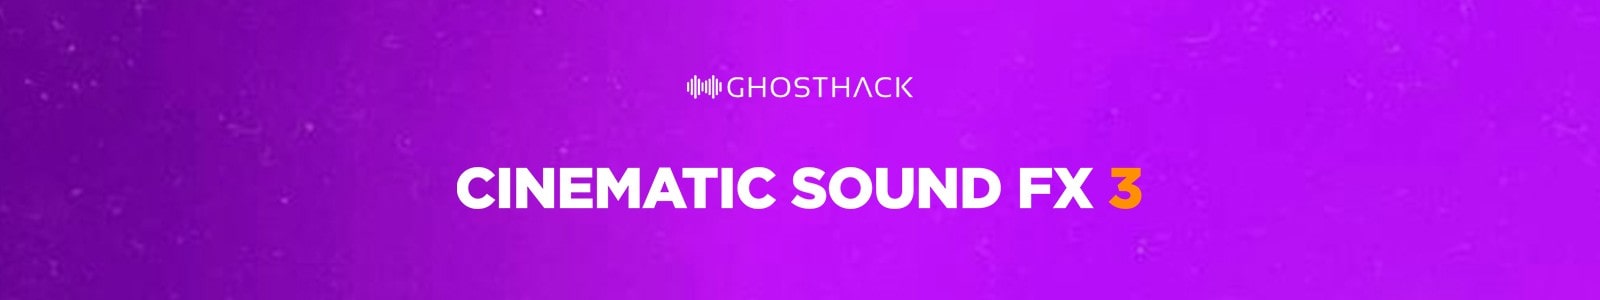 Cinematic Sound FX 3 by Ghosthack